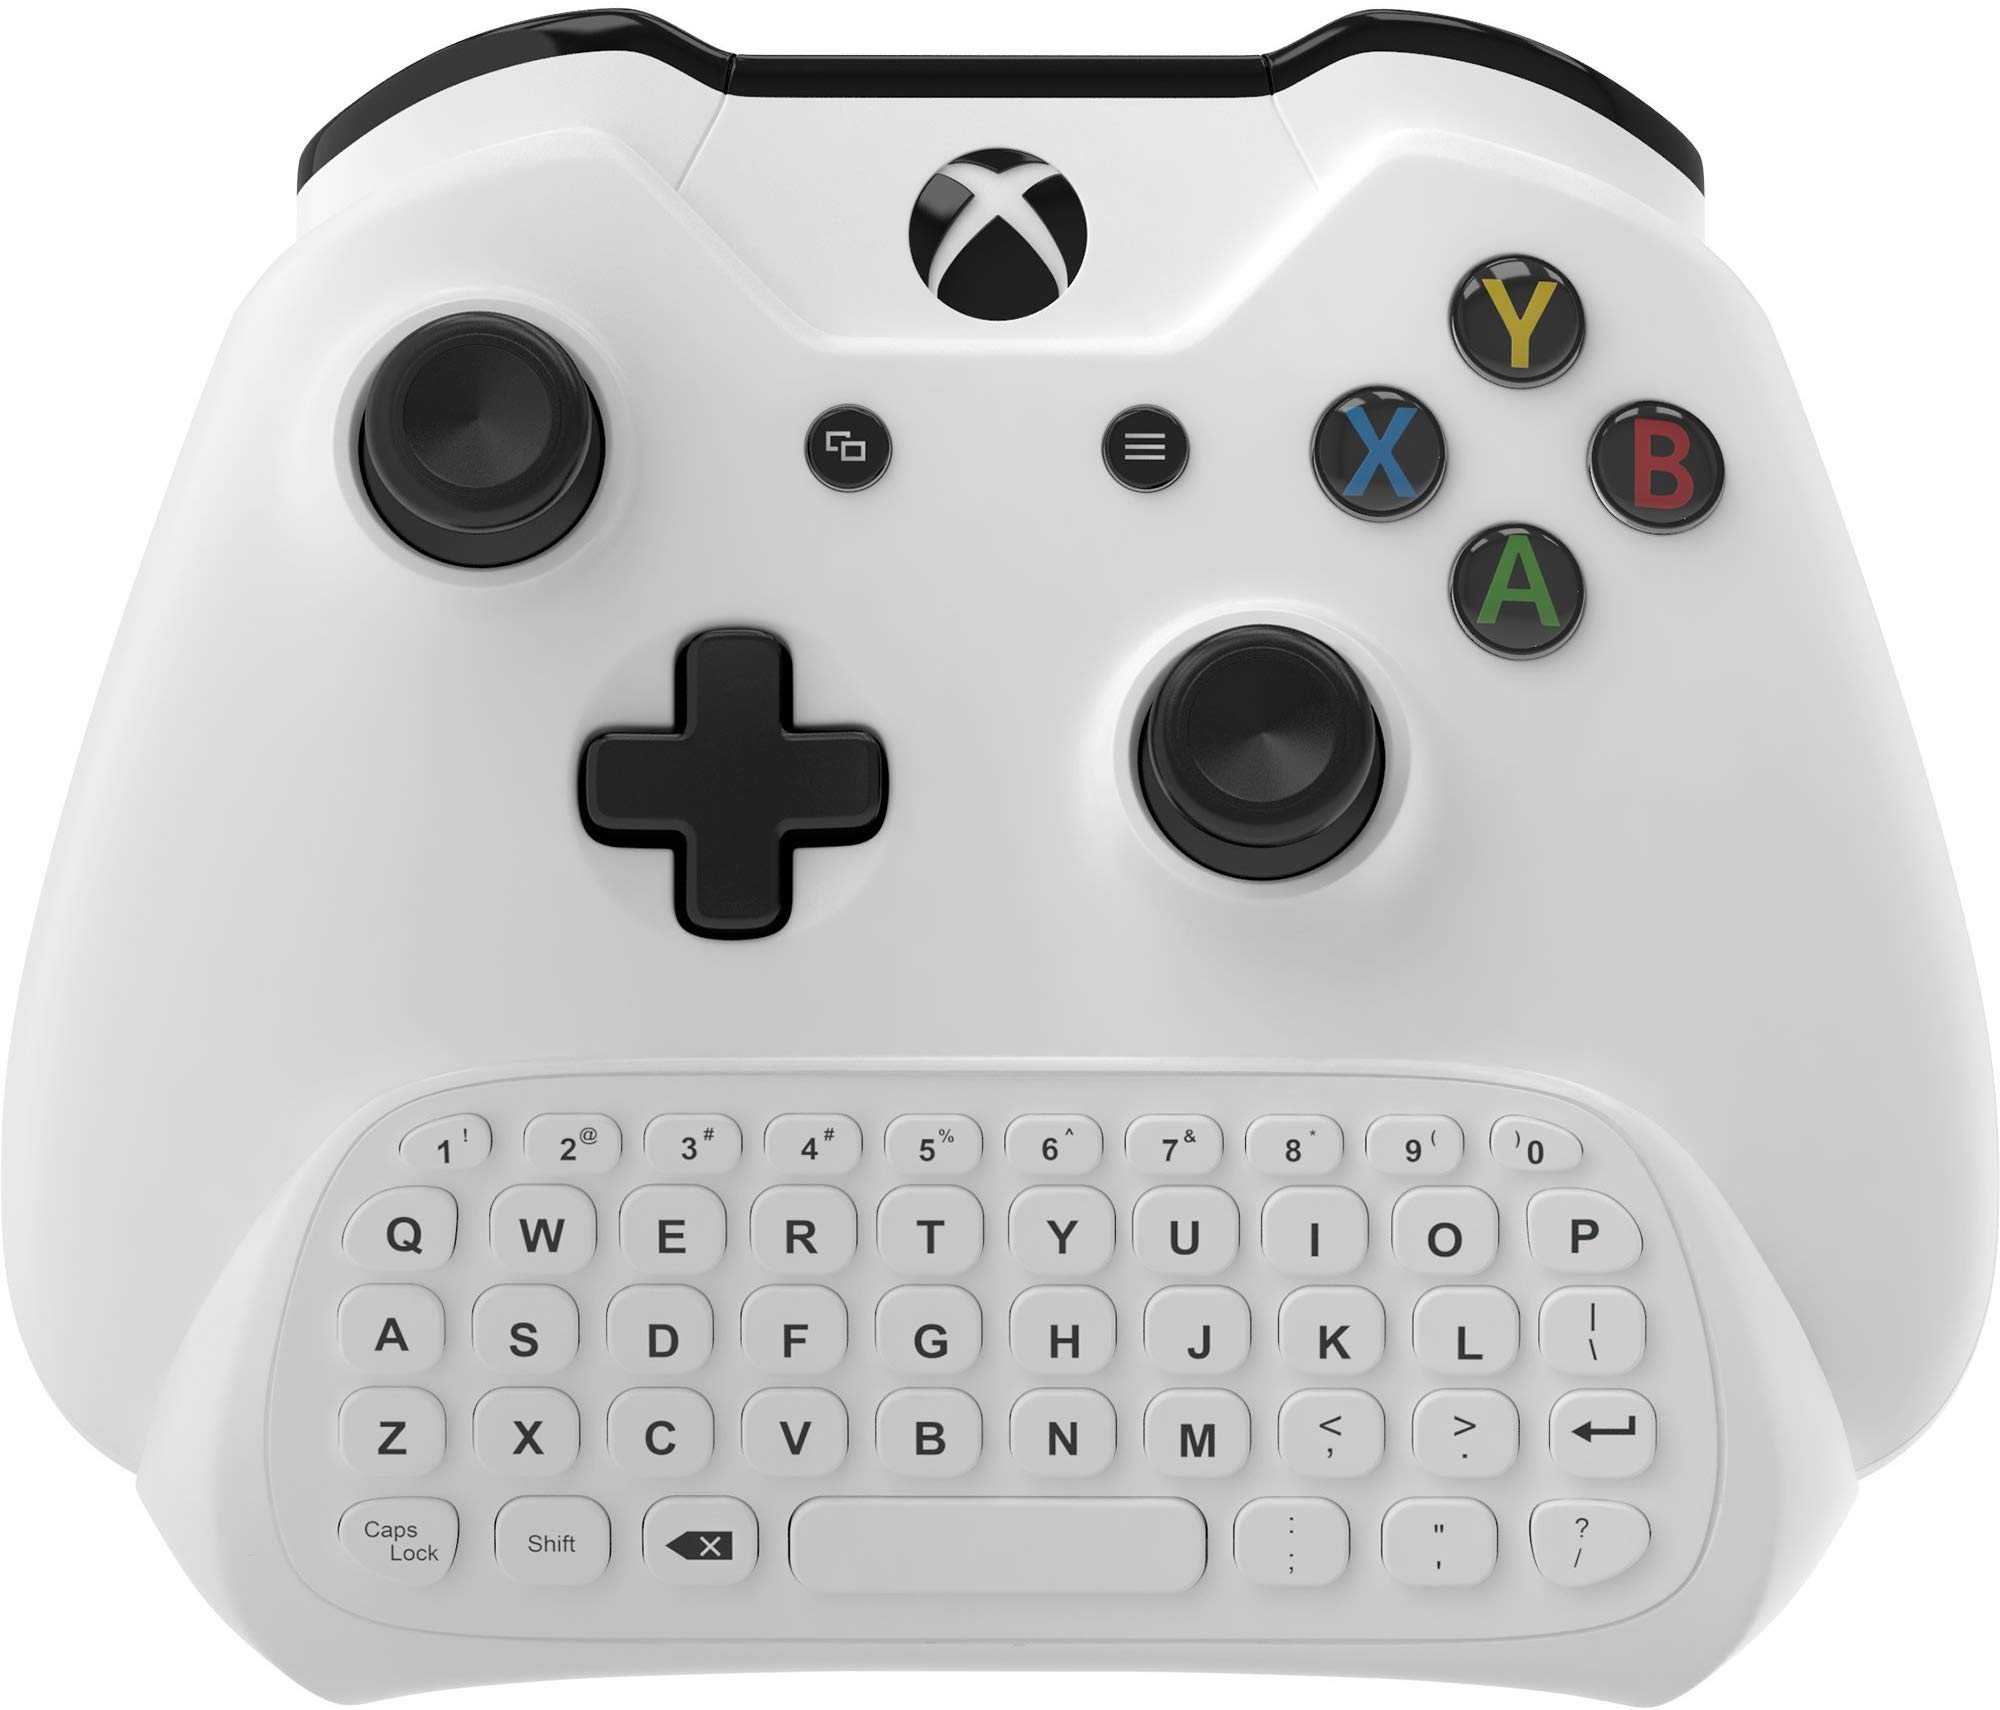 Ortz Xbox One S Chatpad Keyboard KeyPad White [with Headset/Audio Jack] Best for Wireless Chat - Built in USB Receiver for Xbox One Game Controller - Easy Sync with your Controller